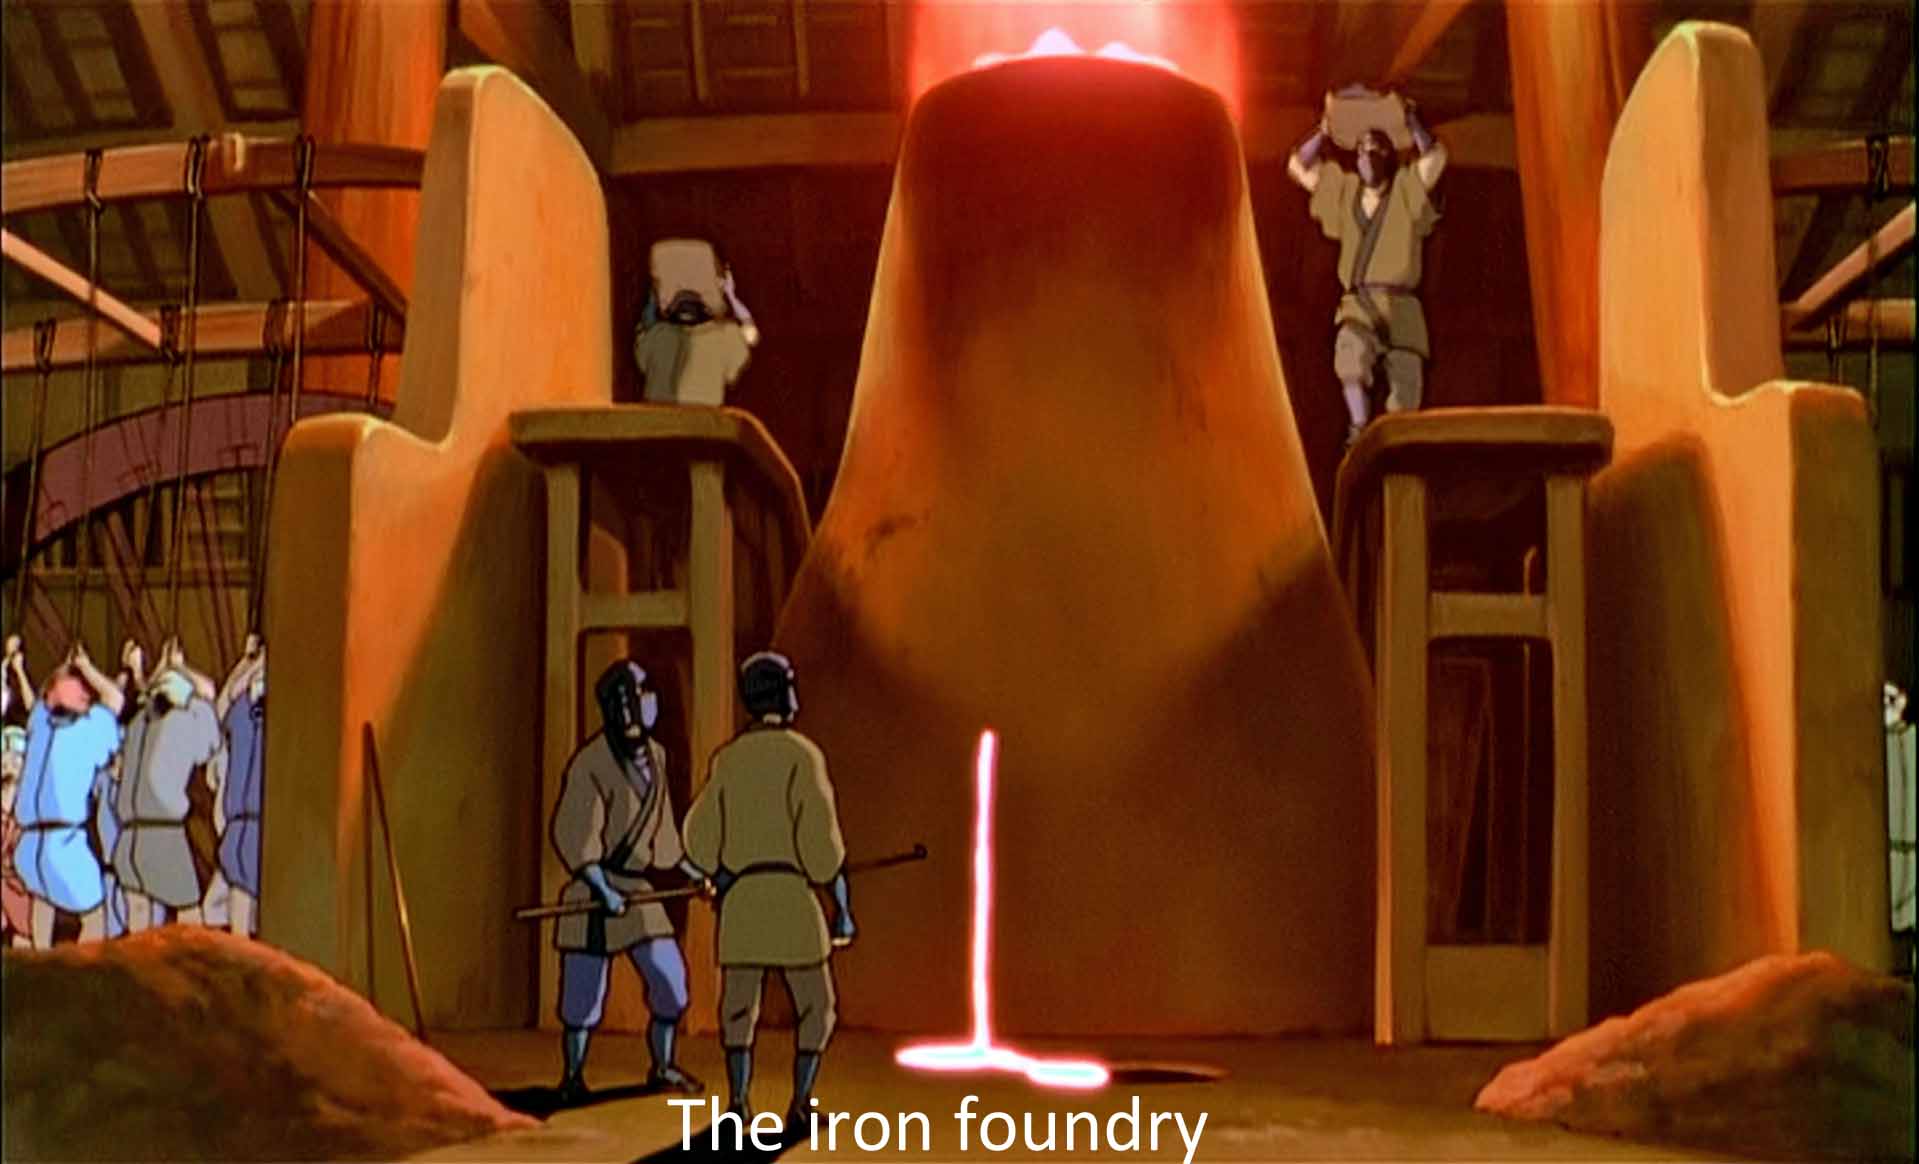 The iron foundry